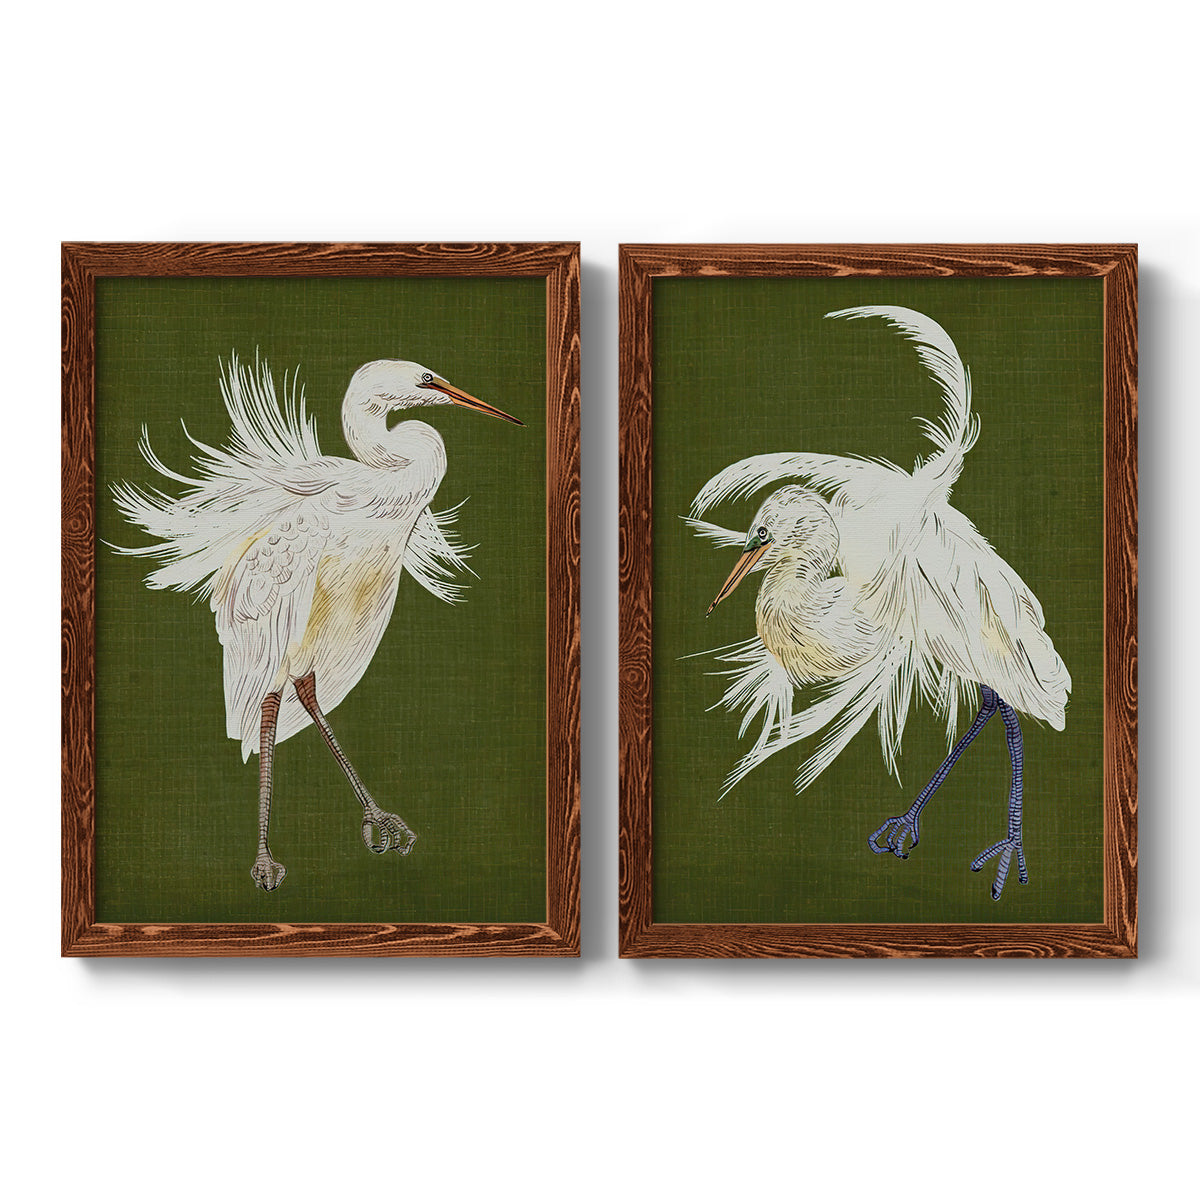 Heron Plumage I - Premium Framed Canvas 2 Piece Set - Ready to Hang